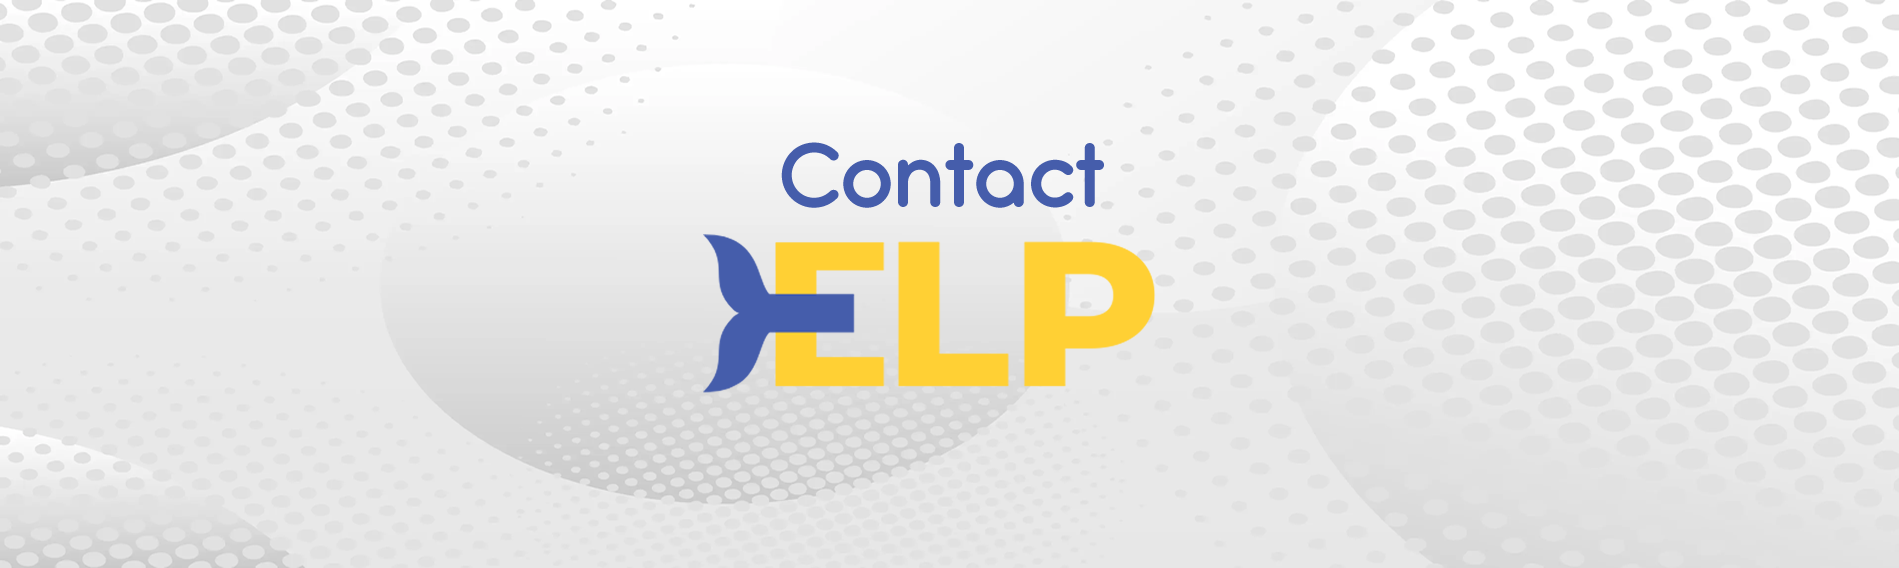 ELP Contact Banner